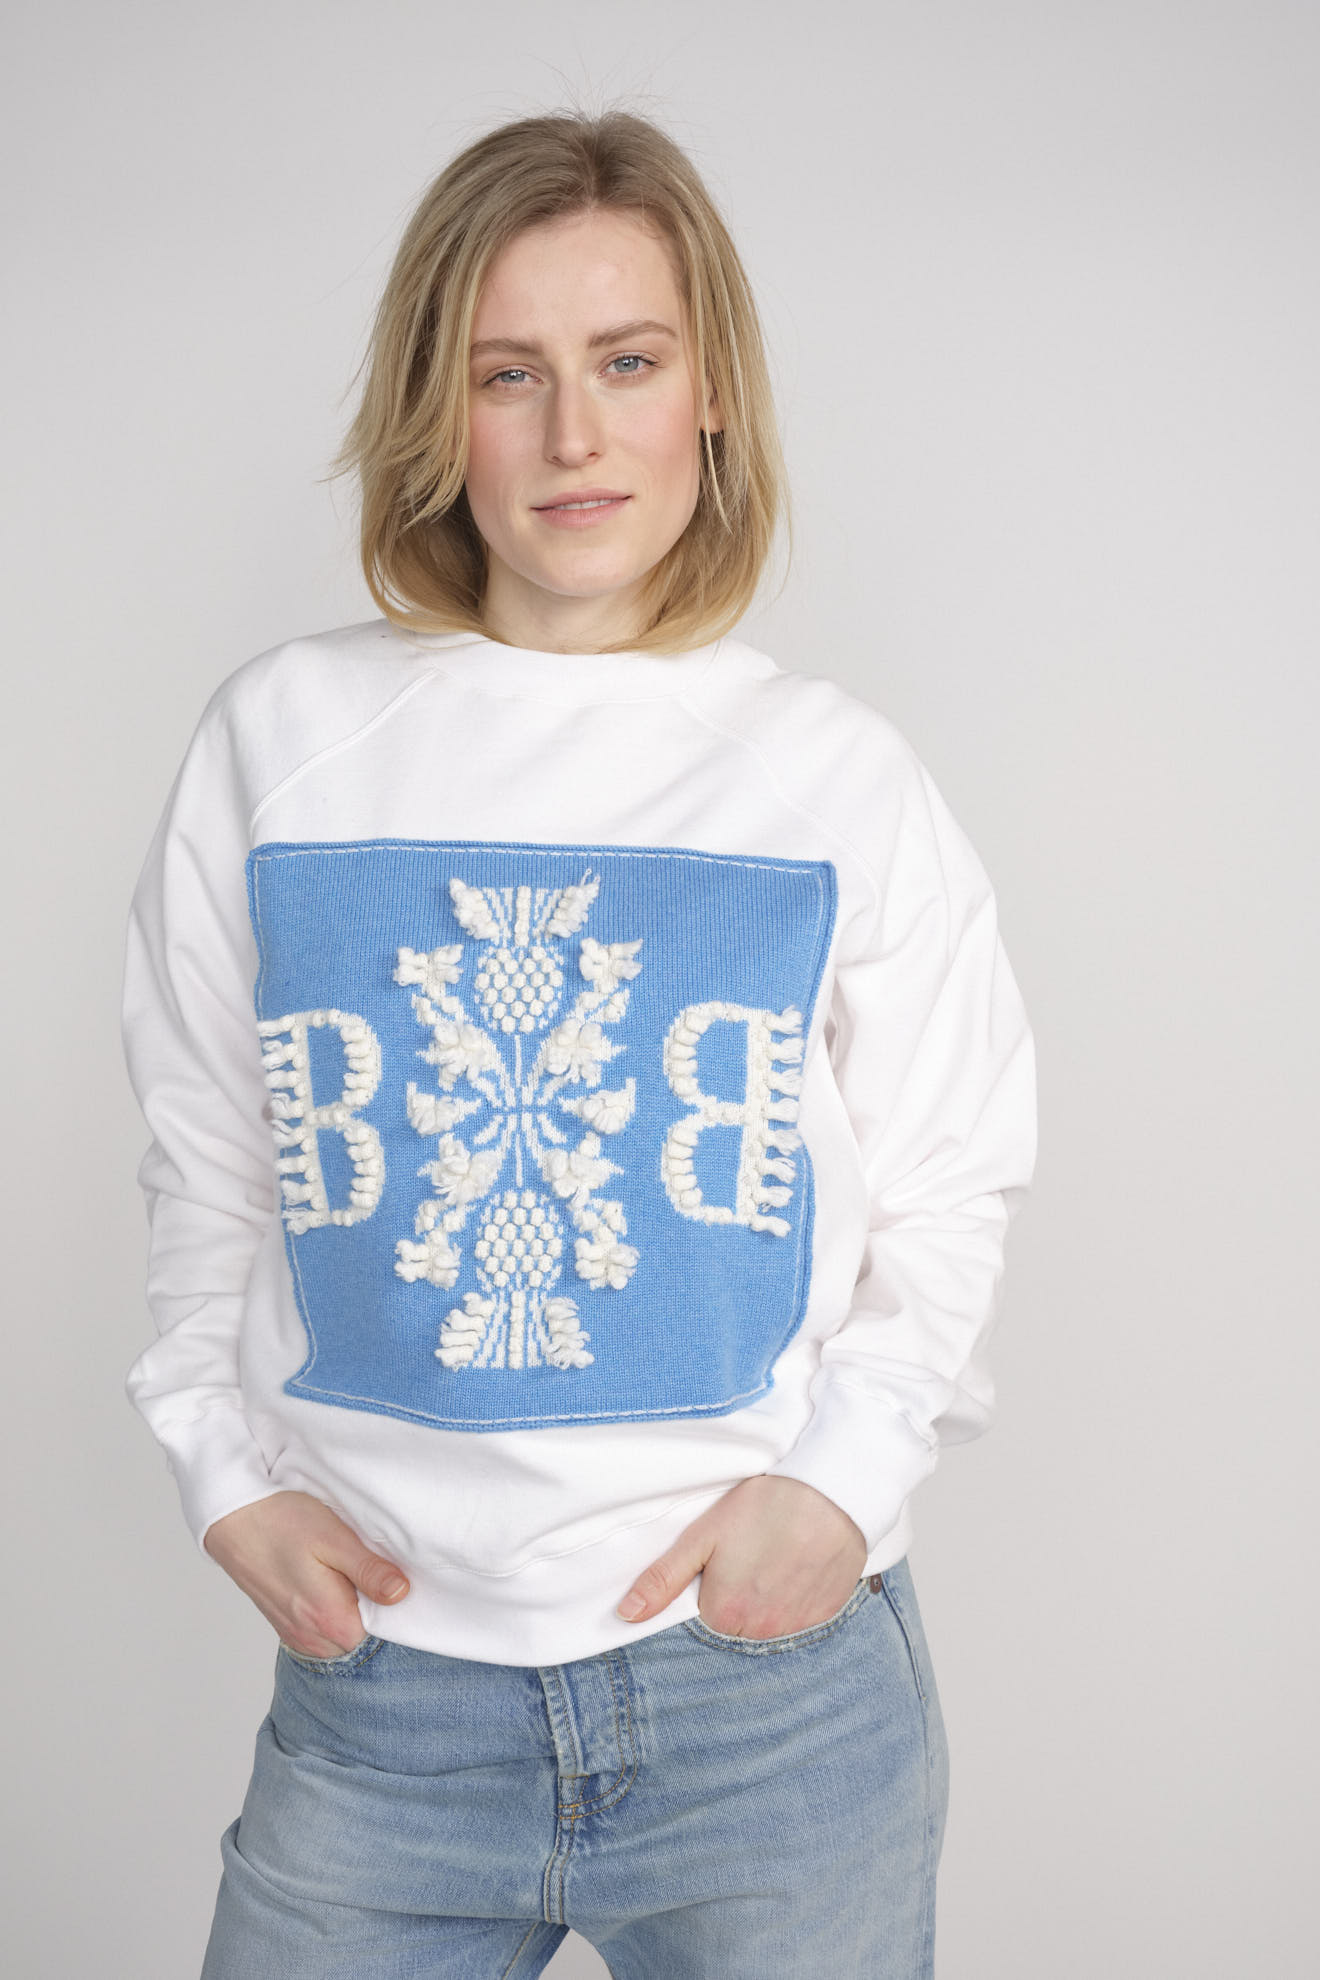 Barrie sweater with Barrie logo cashmere patch - cotton sweater with cashmere logo blue M